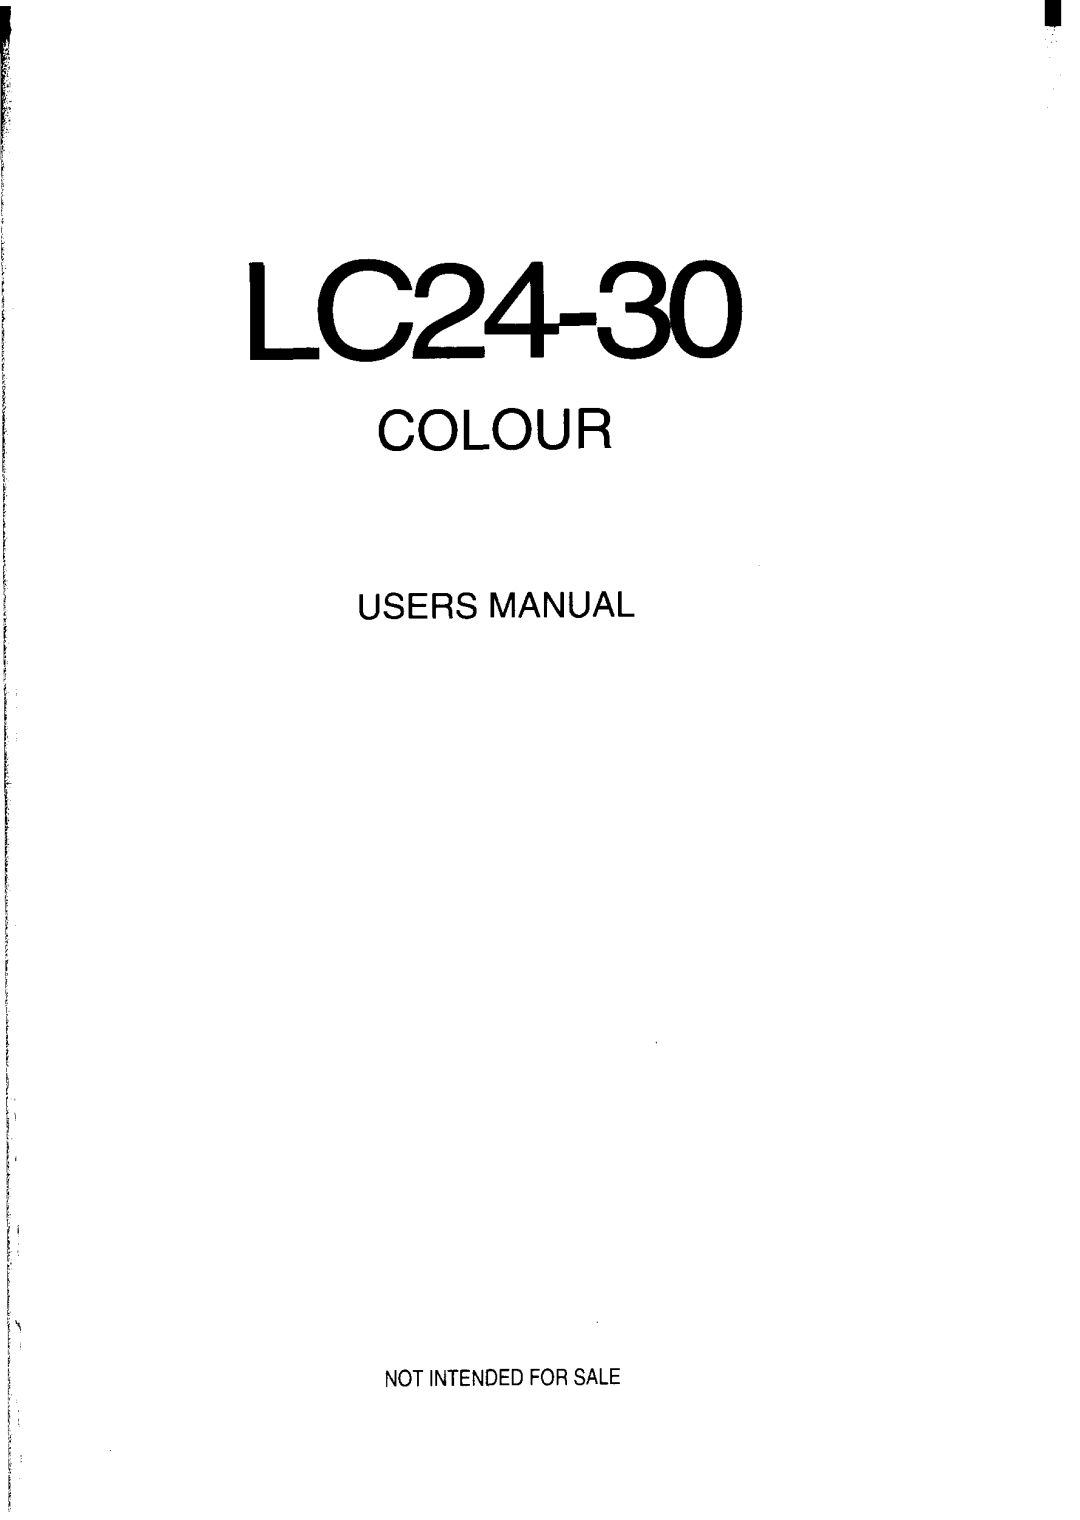 Star Micronics LC24-30 user manual Colour, Users Manual, Not Intended For Sale 